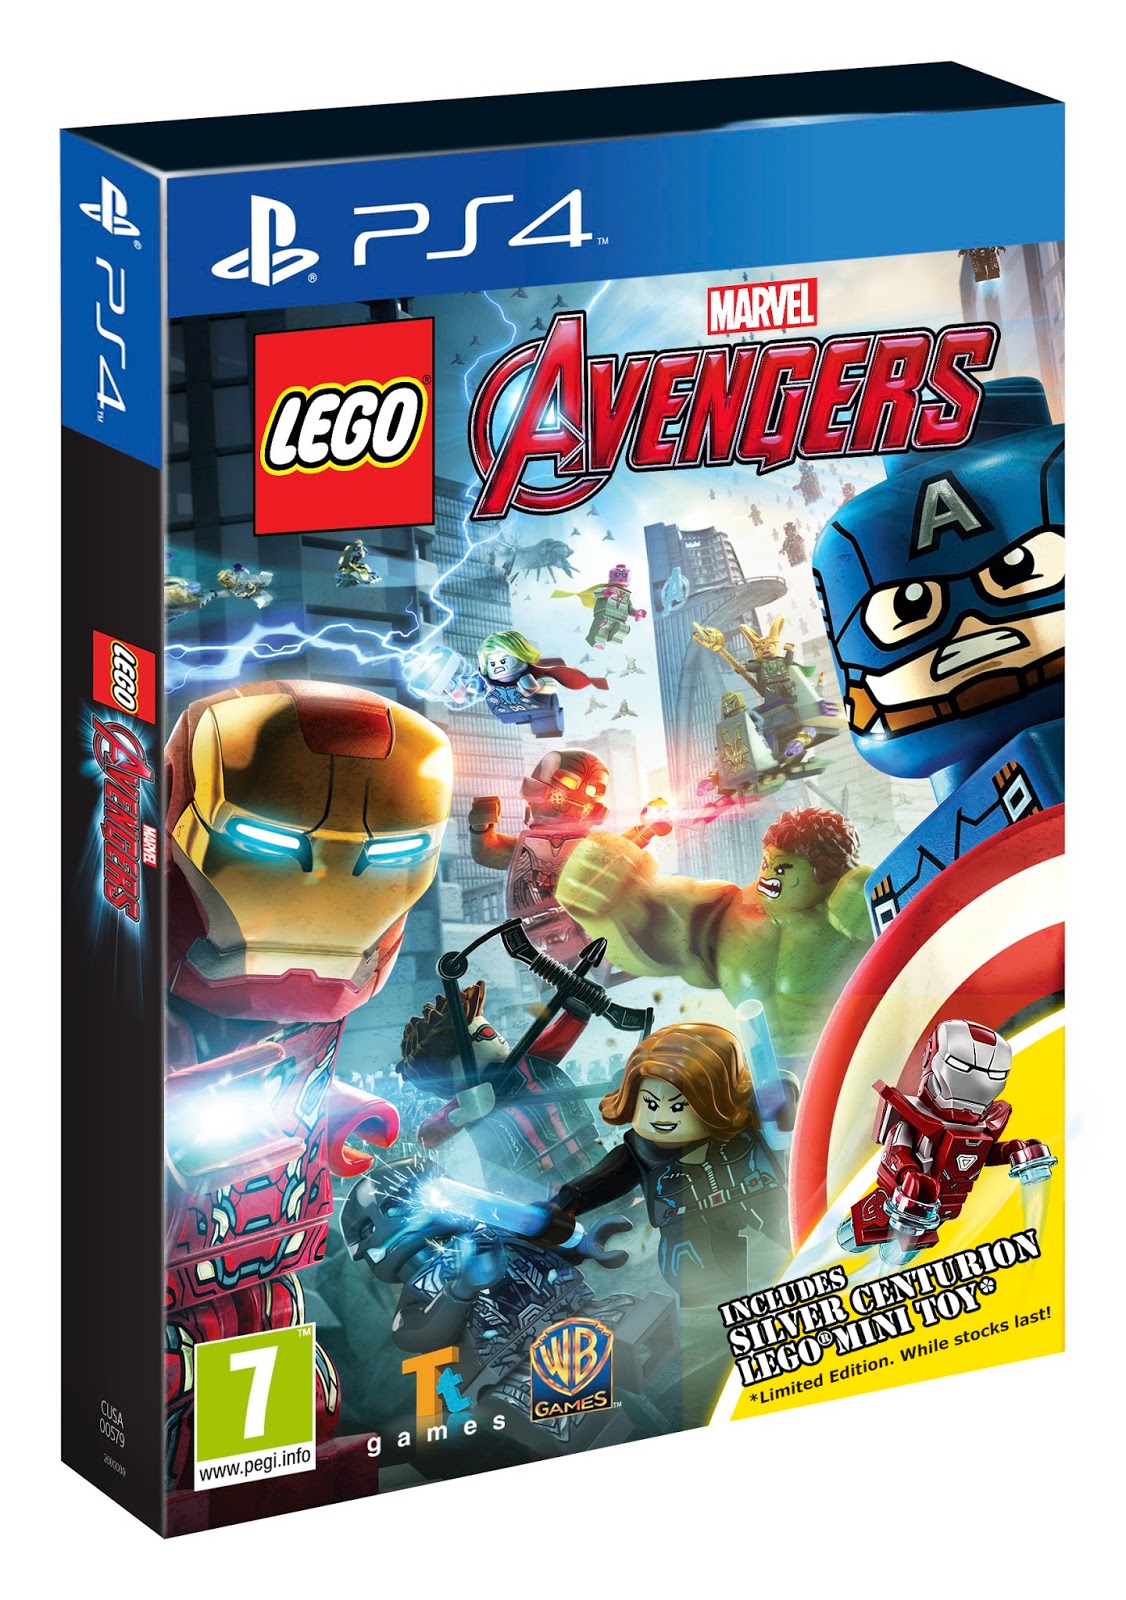 All About Bricks: LEGO Avengers Review